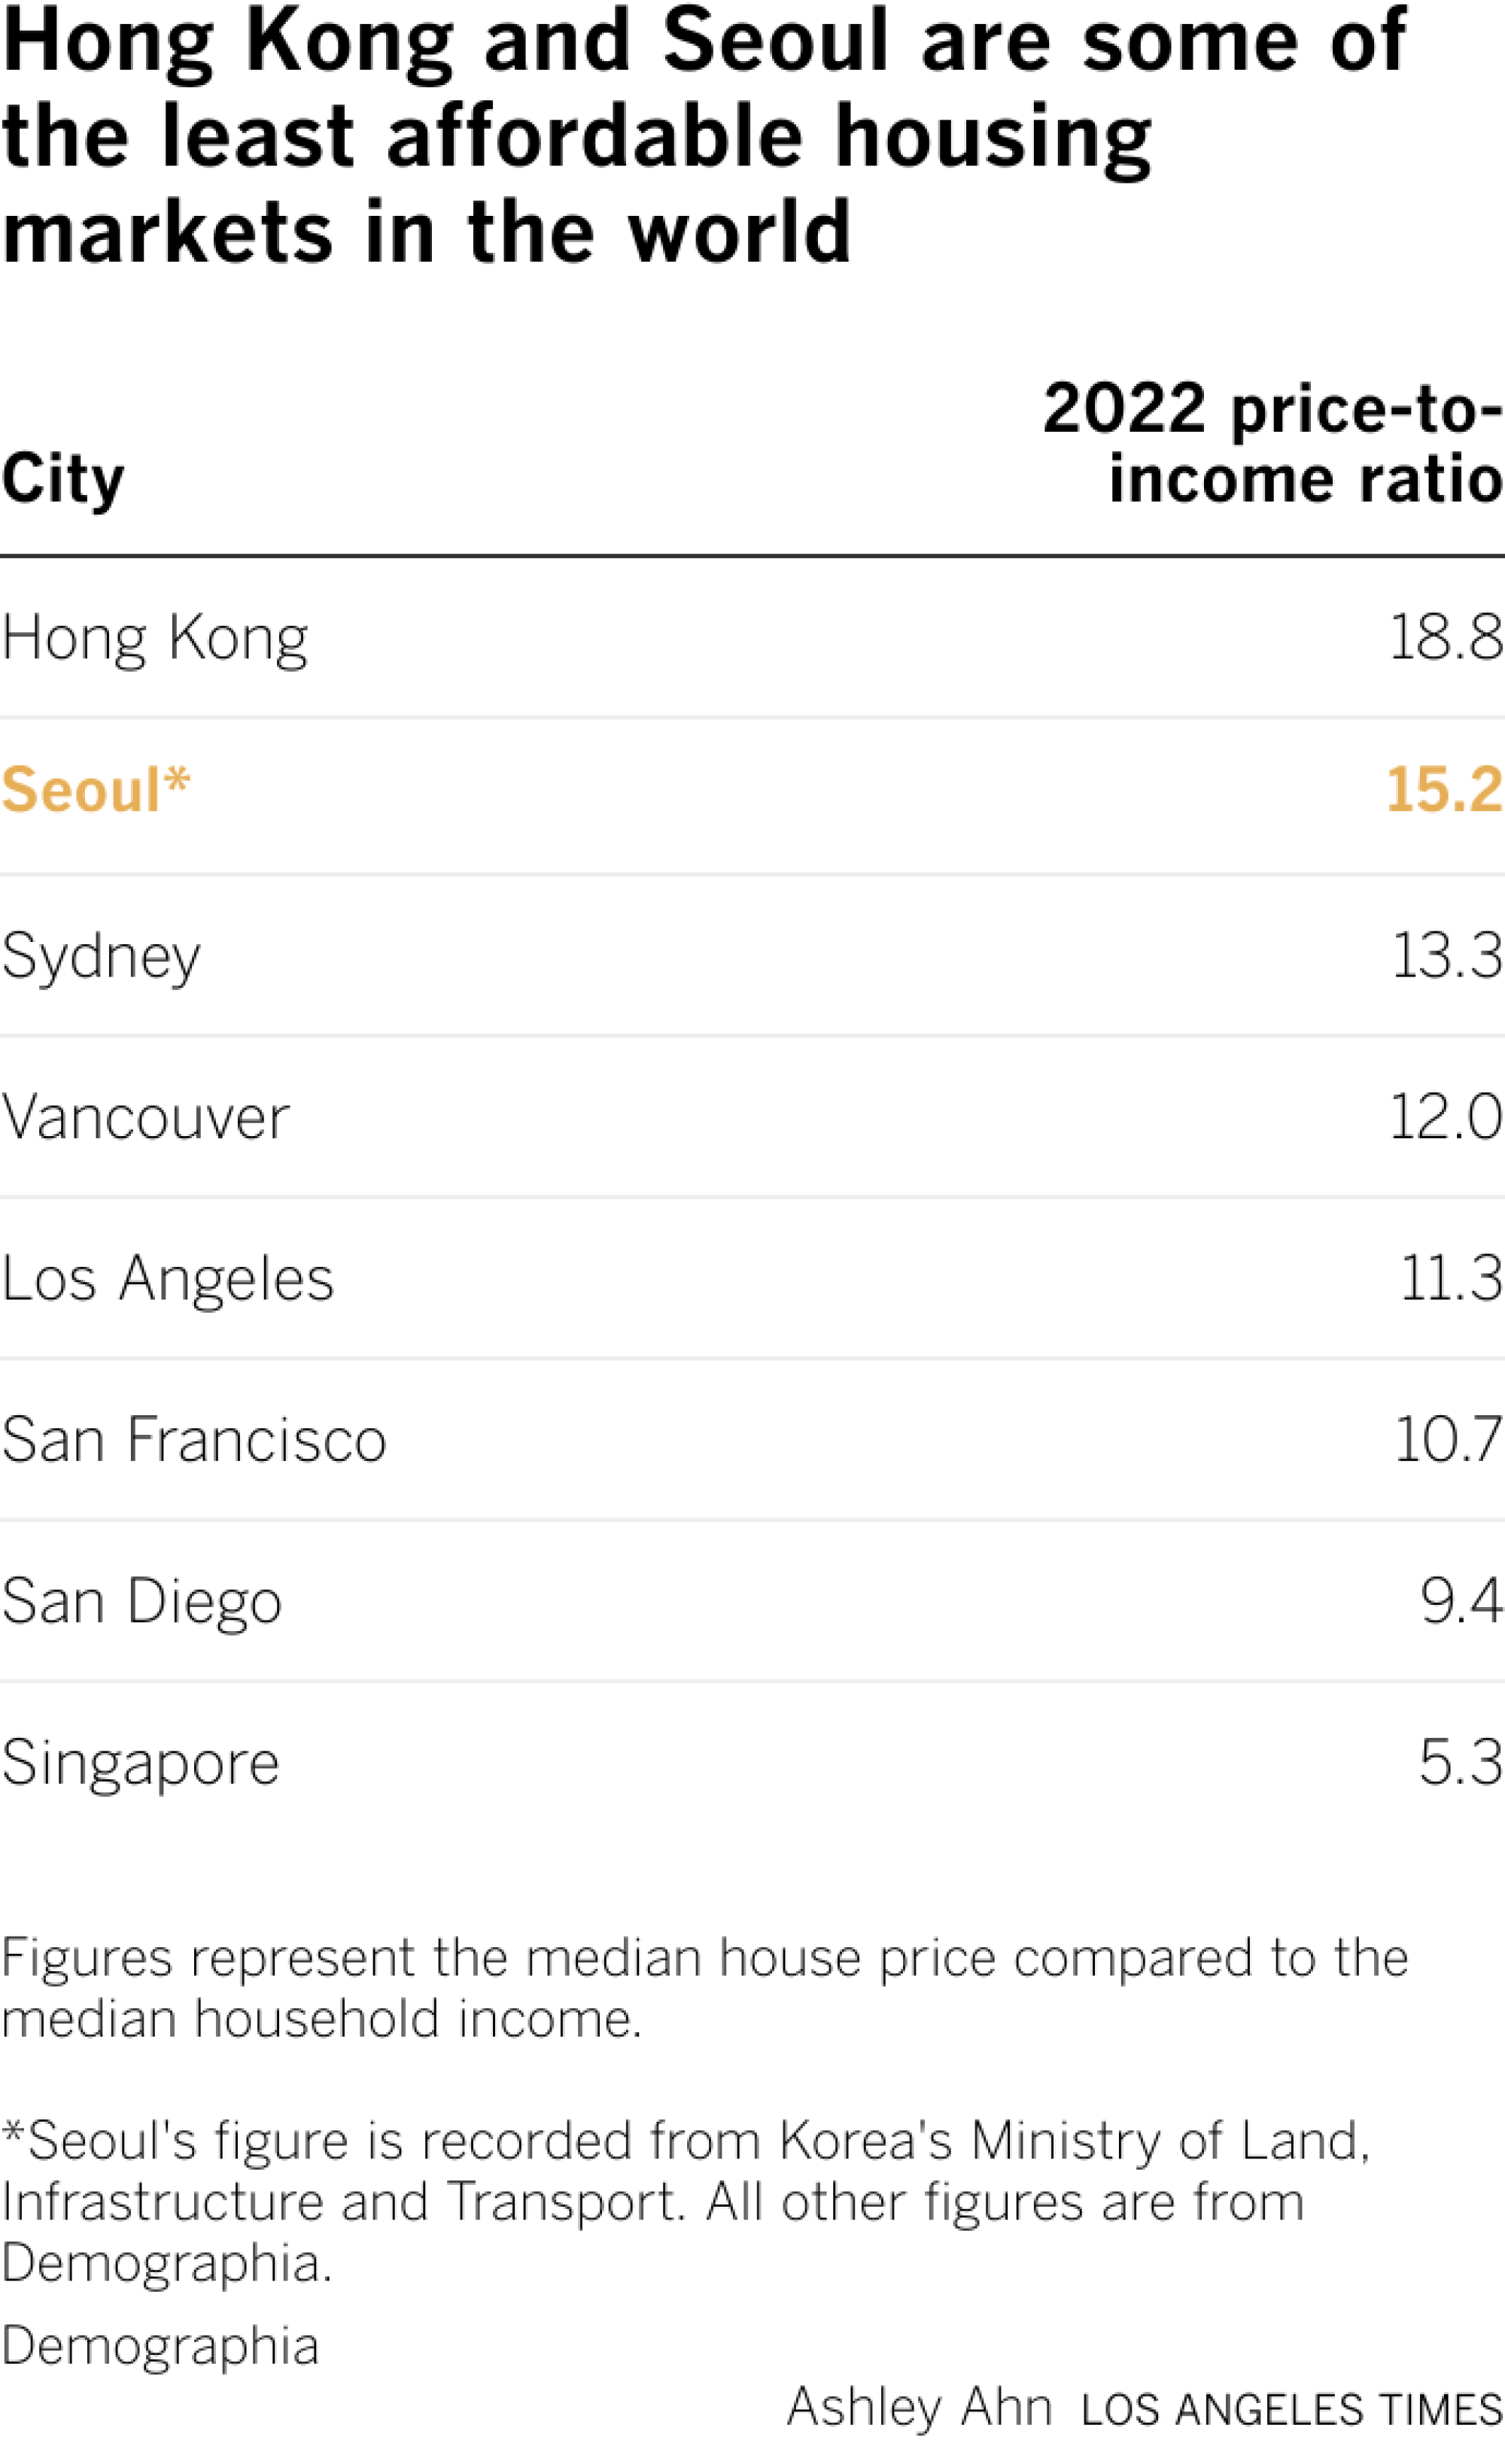 Hong Kong and Seoul are among the least affordable real estate markets in the world.